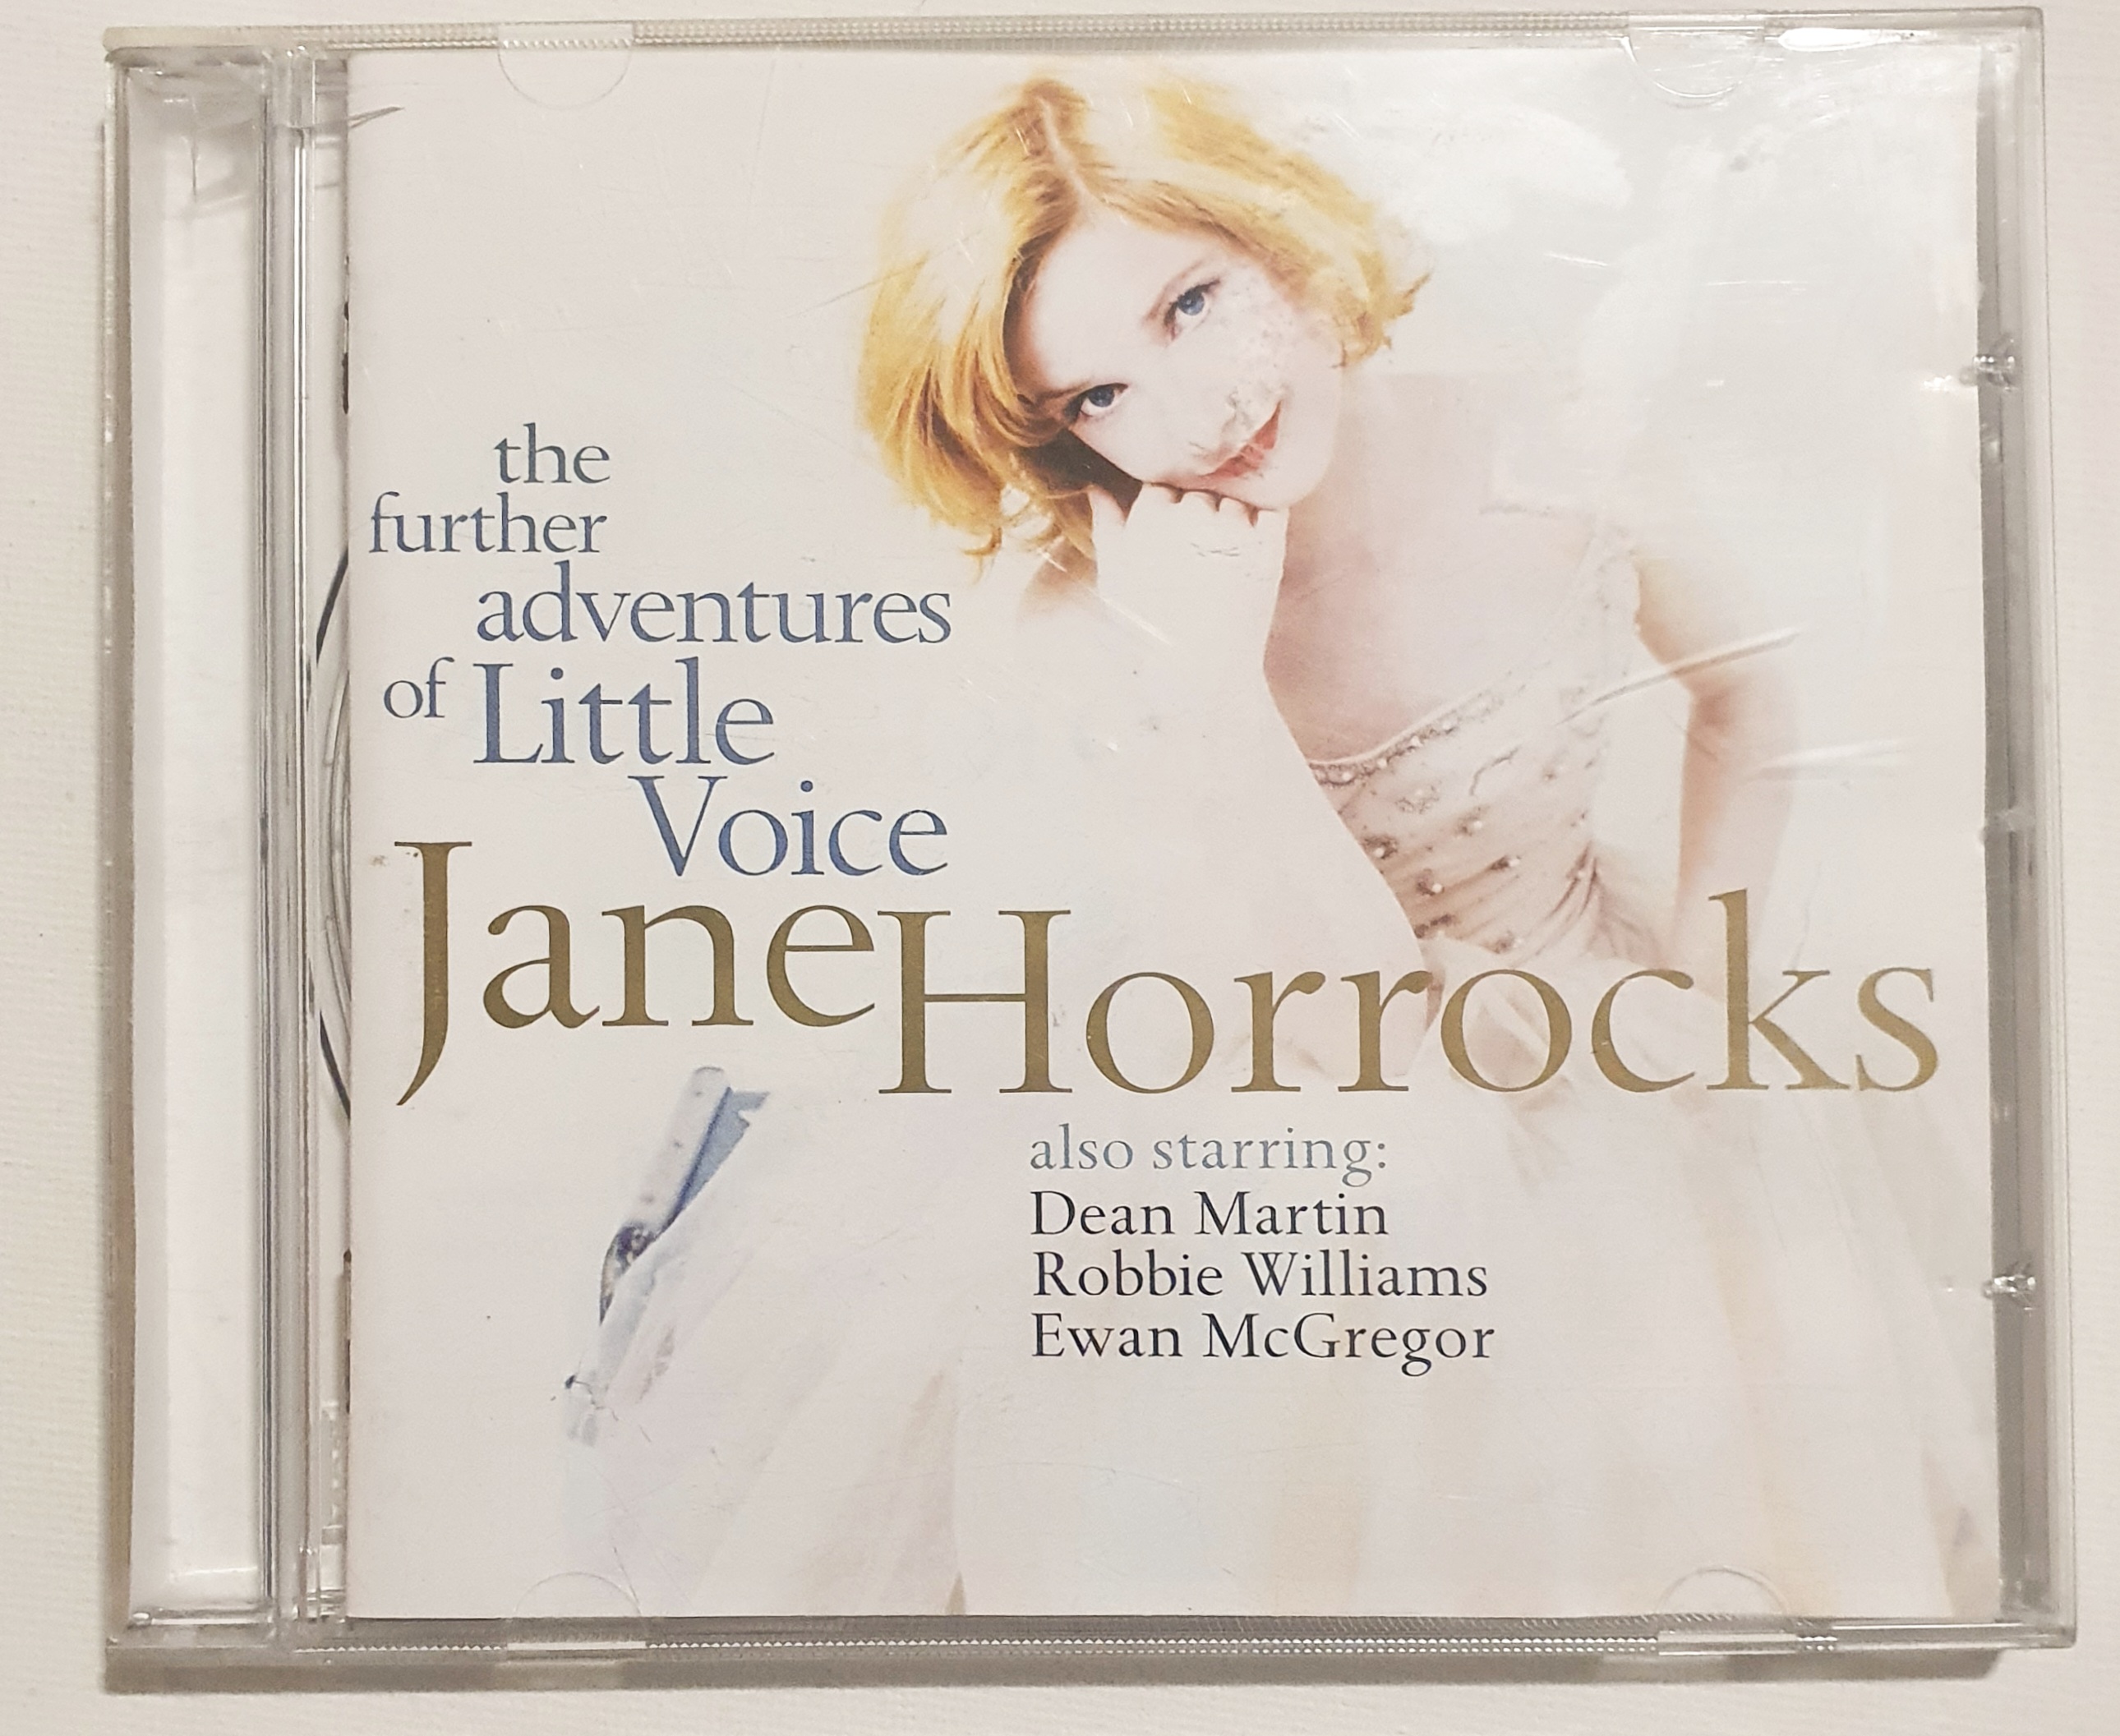 CD Jane Horrocks, The further adventures of little voice